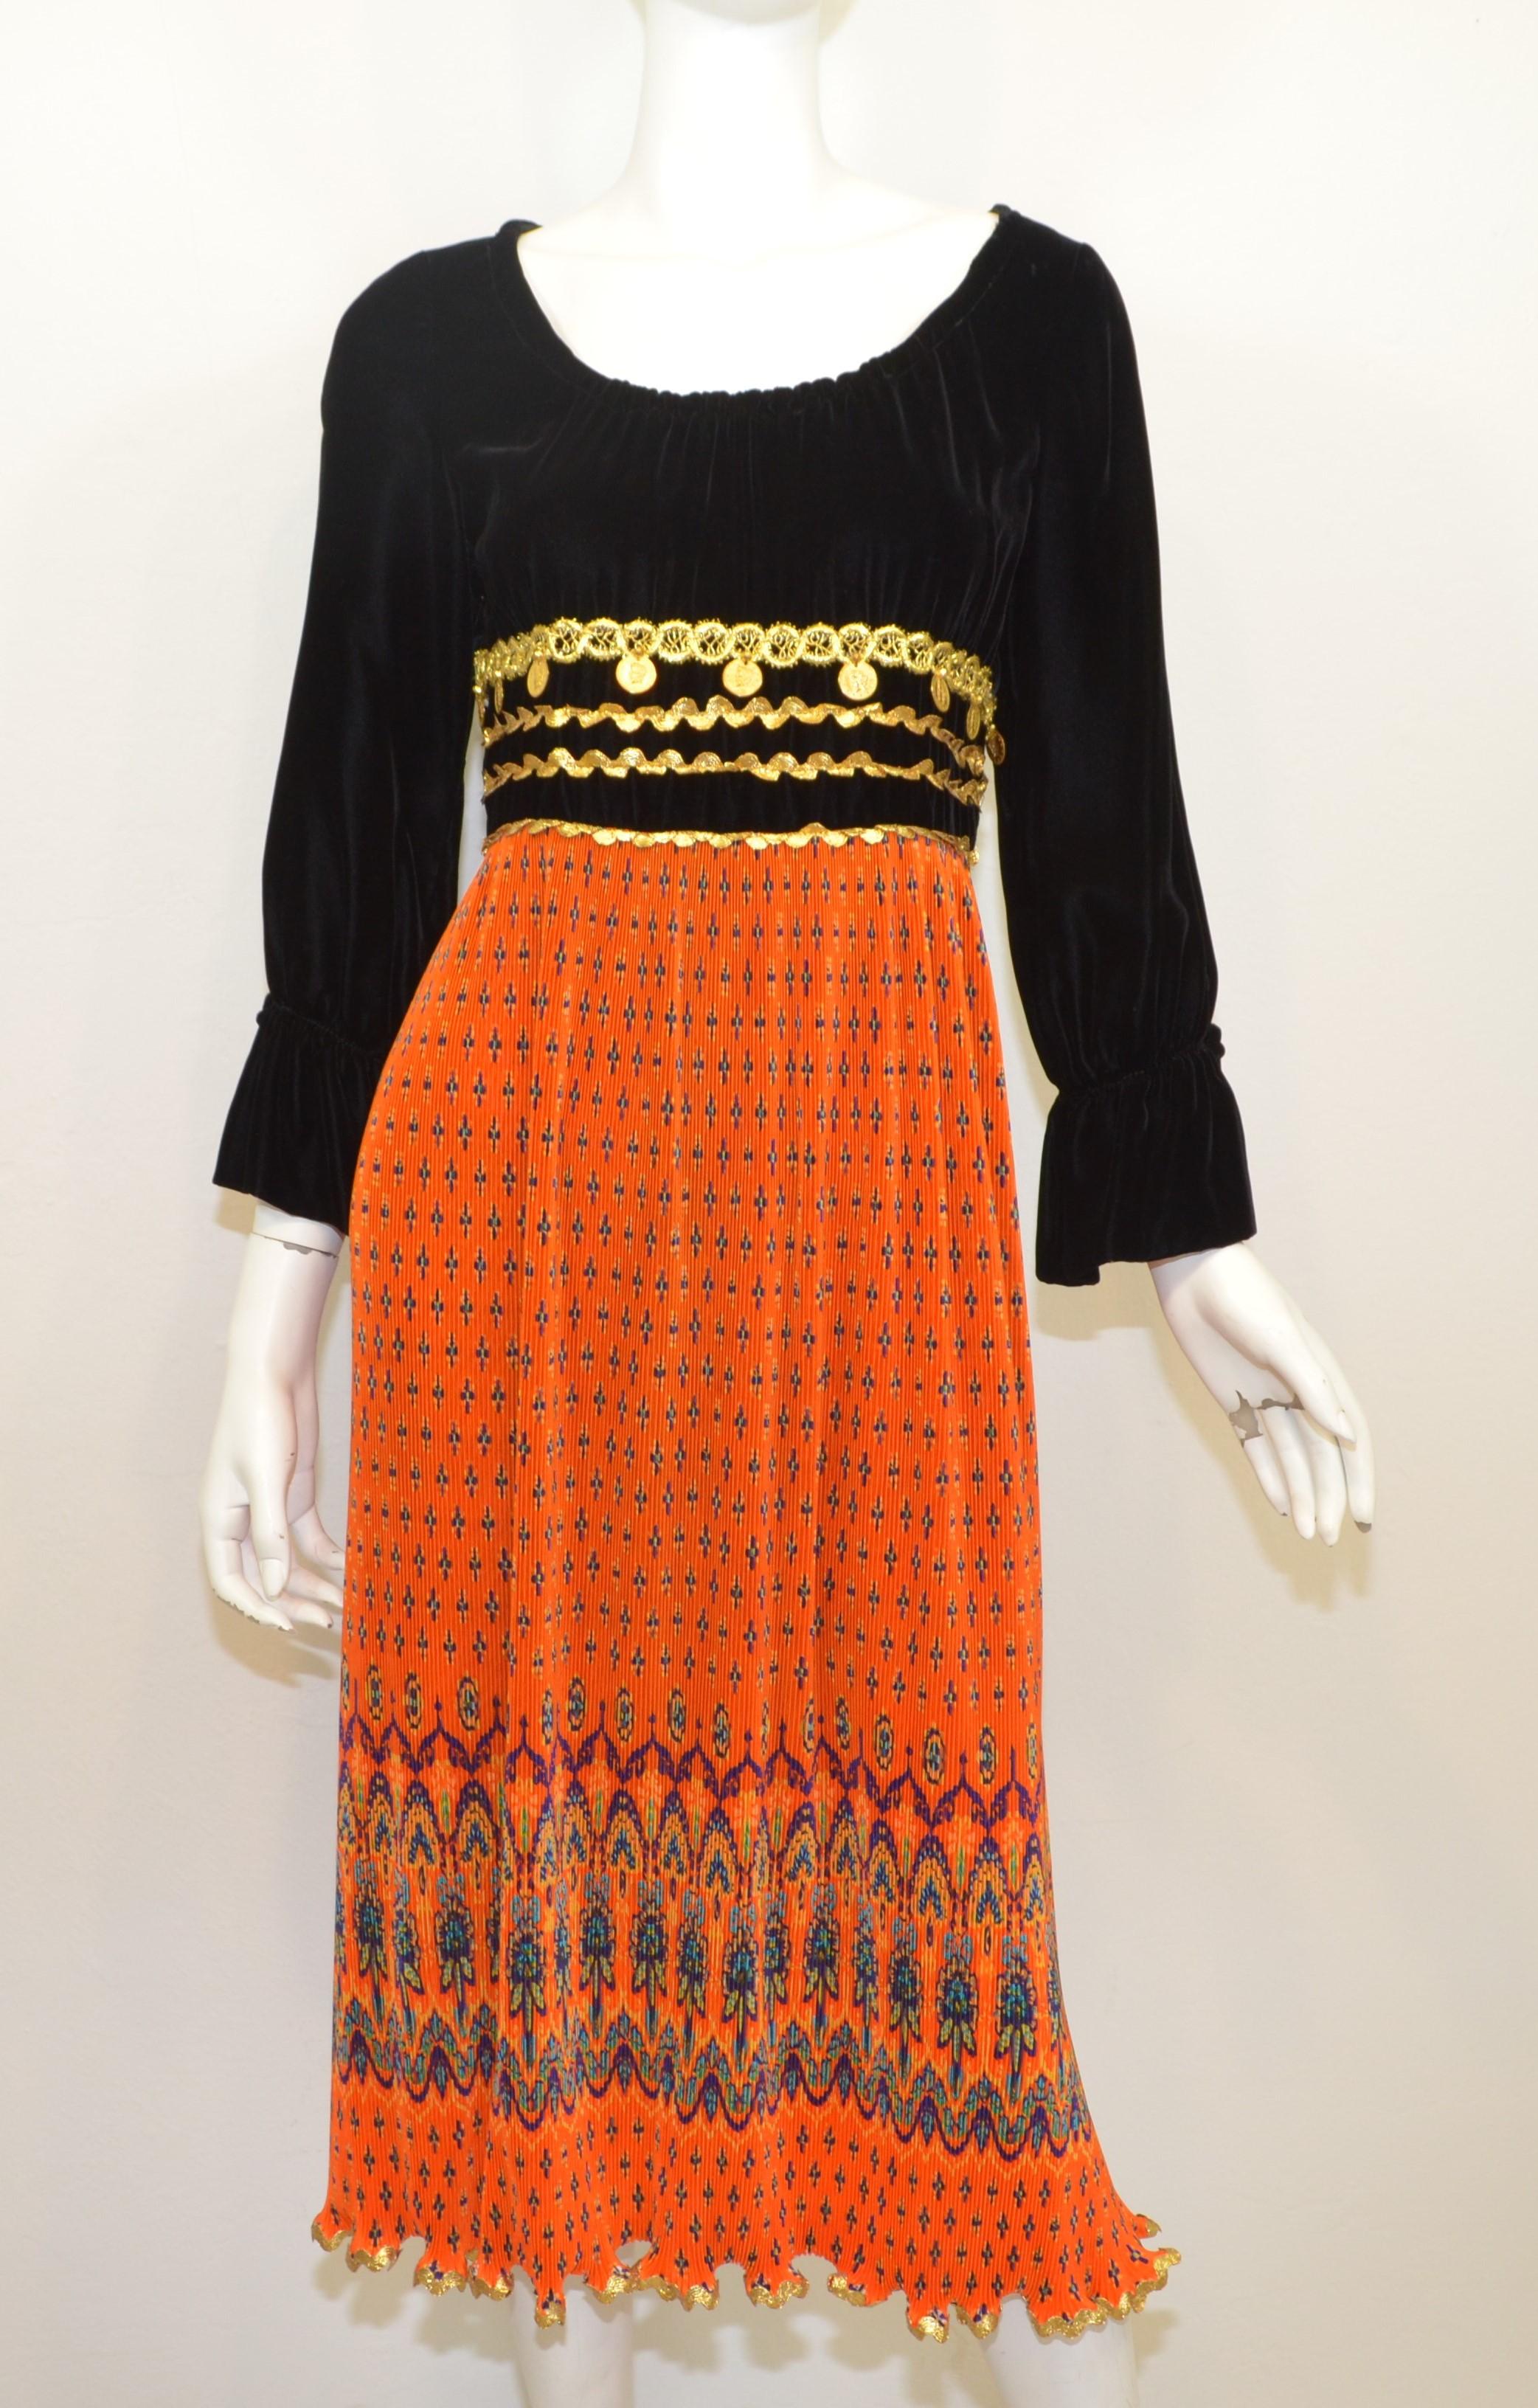 Vintage Bill Blass dress features a black velvet top half with a tie detail on the sleeves, metallic gold threading and dangling coin embellishments. Skirt is featured in a vibrant orange with a pleated design and mixed pattern throughout. Dress has